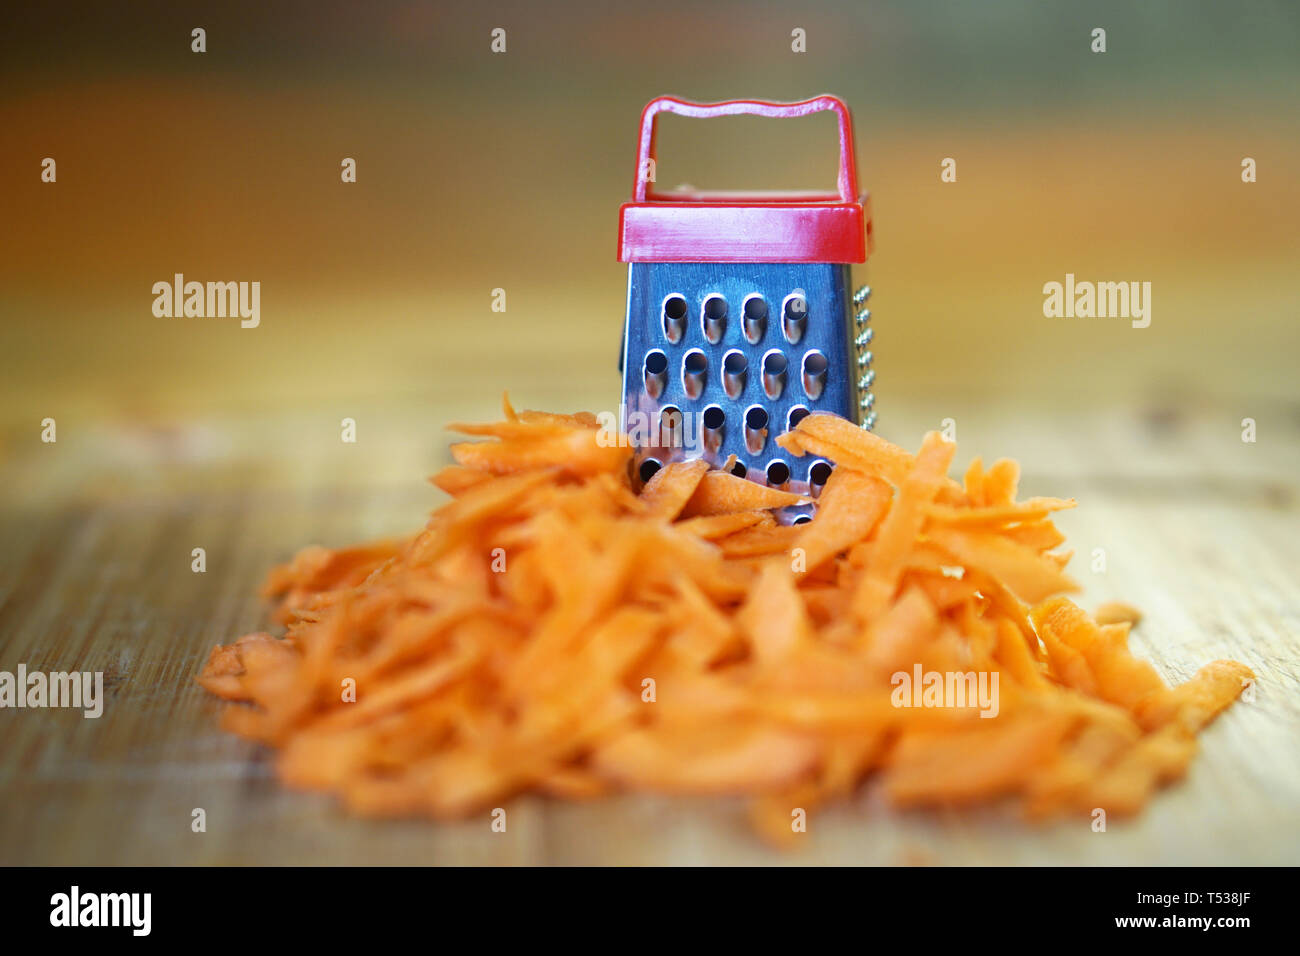 A large carrot and a small grater on a cutting board in the kitchen. Optical illusion. Close-up. Shallow depth of field. Horizontal image. Stock Photo